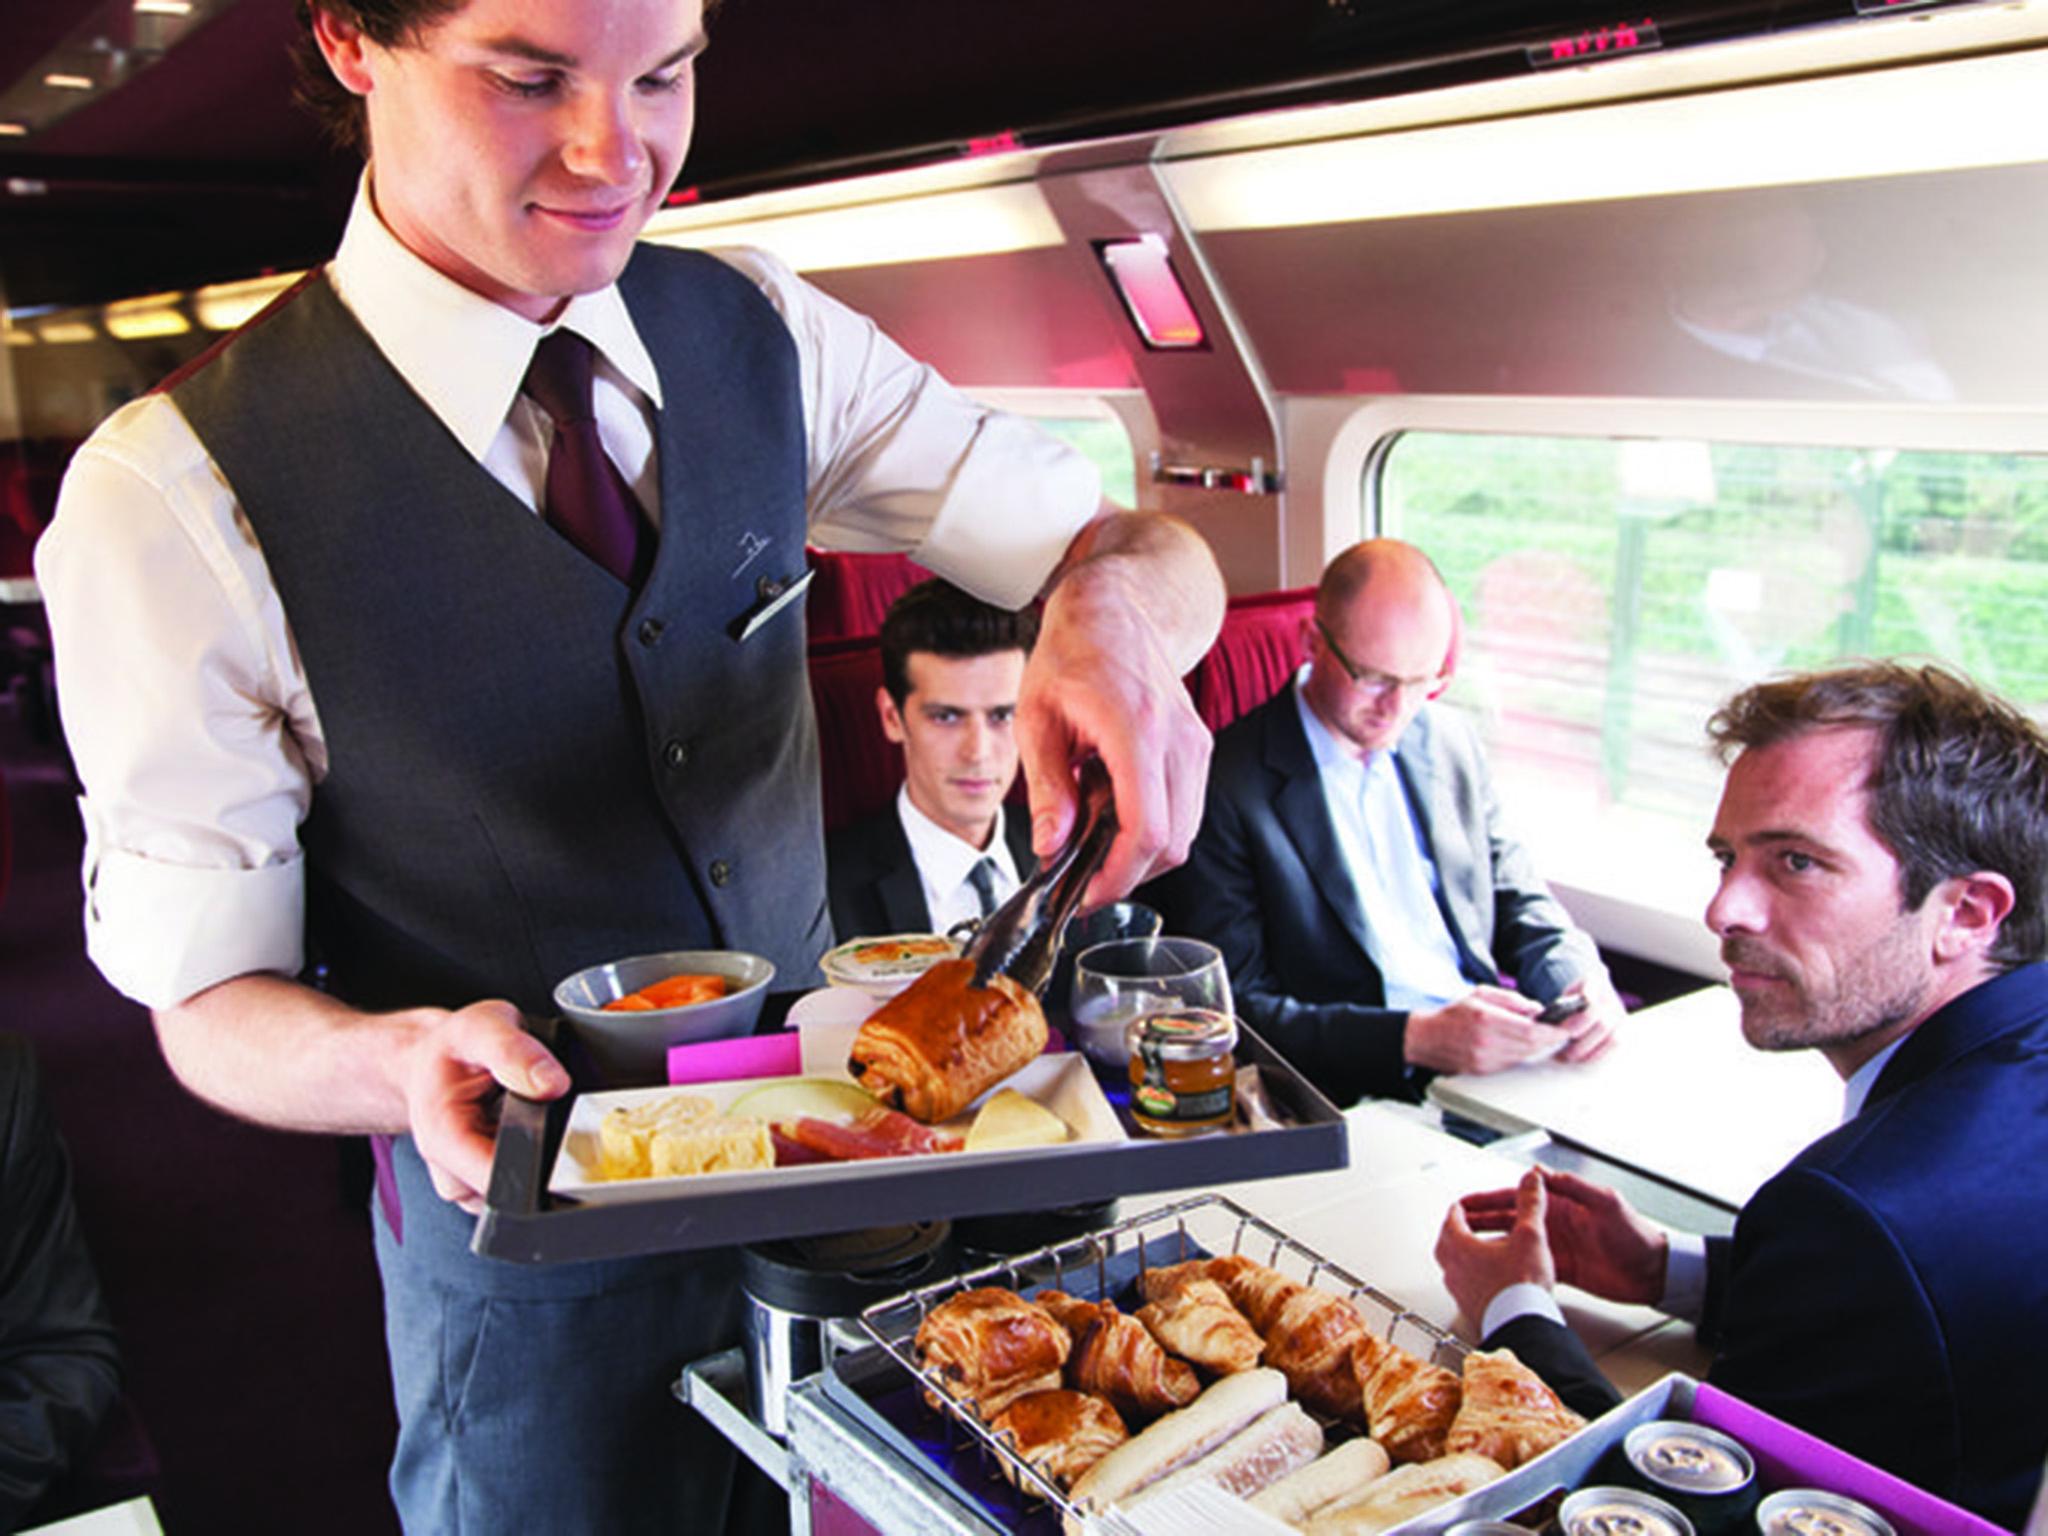 The SNCF owned Thalys line offers breakfasts to its business class customers